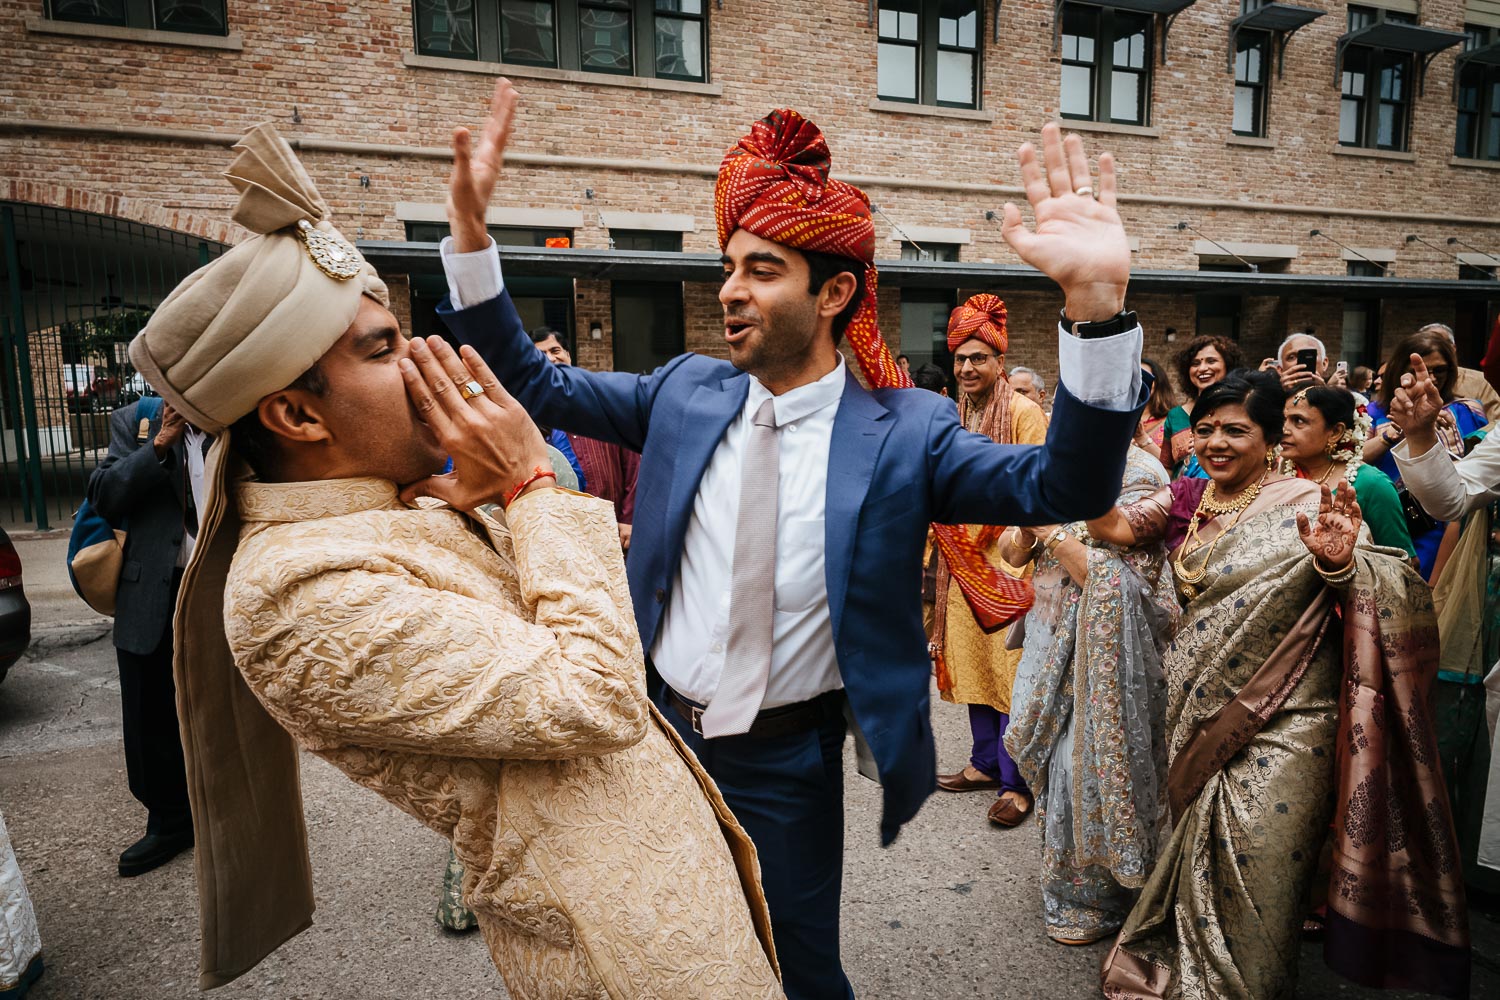 Baraat festivities with the groom and guests in blue suit